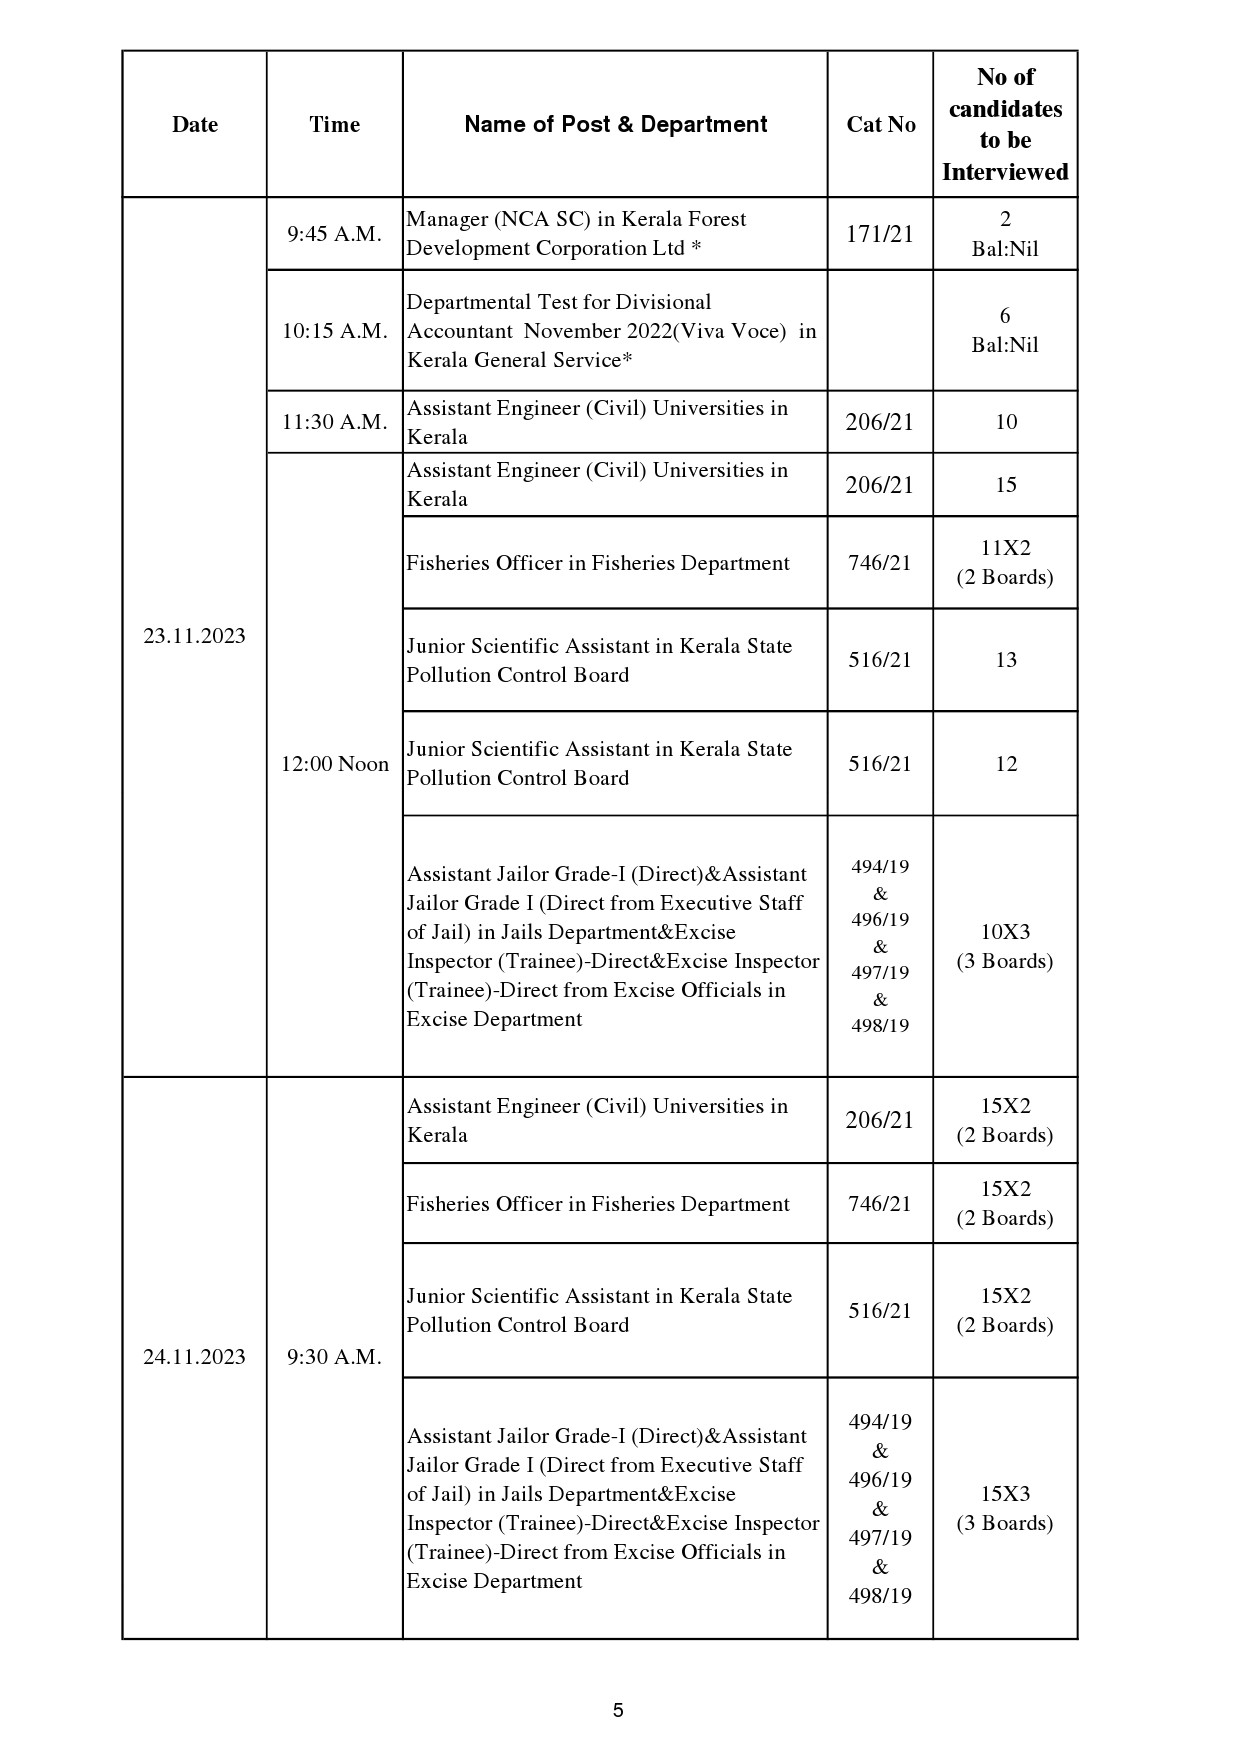 INTERVIEW PROGRAMME FOR THE MONTH OF NOVEMBER 2023 - Notification Image 5